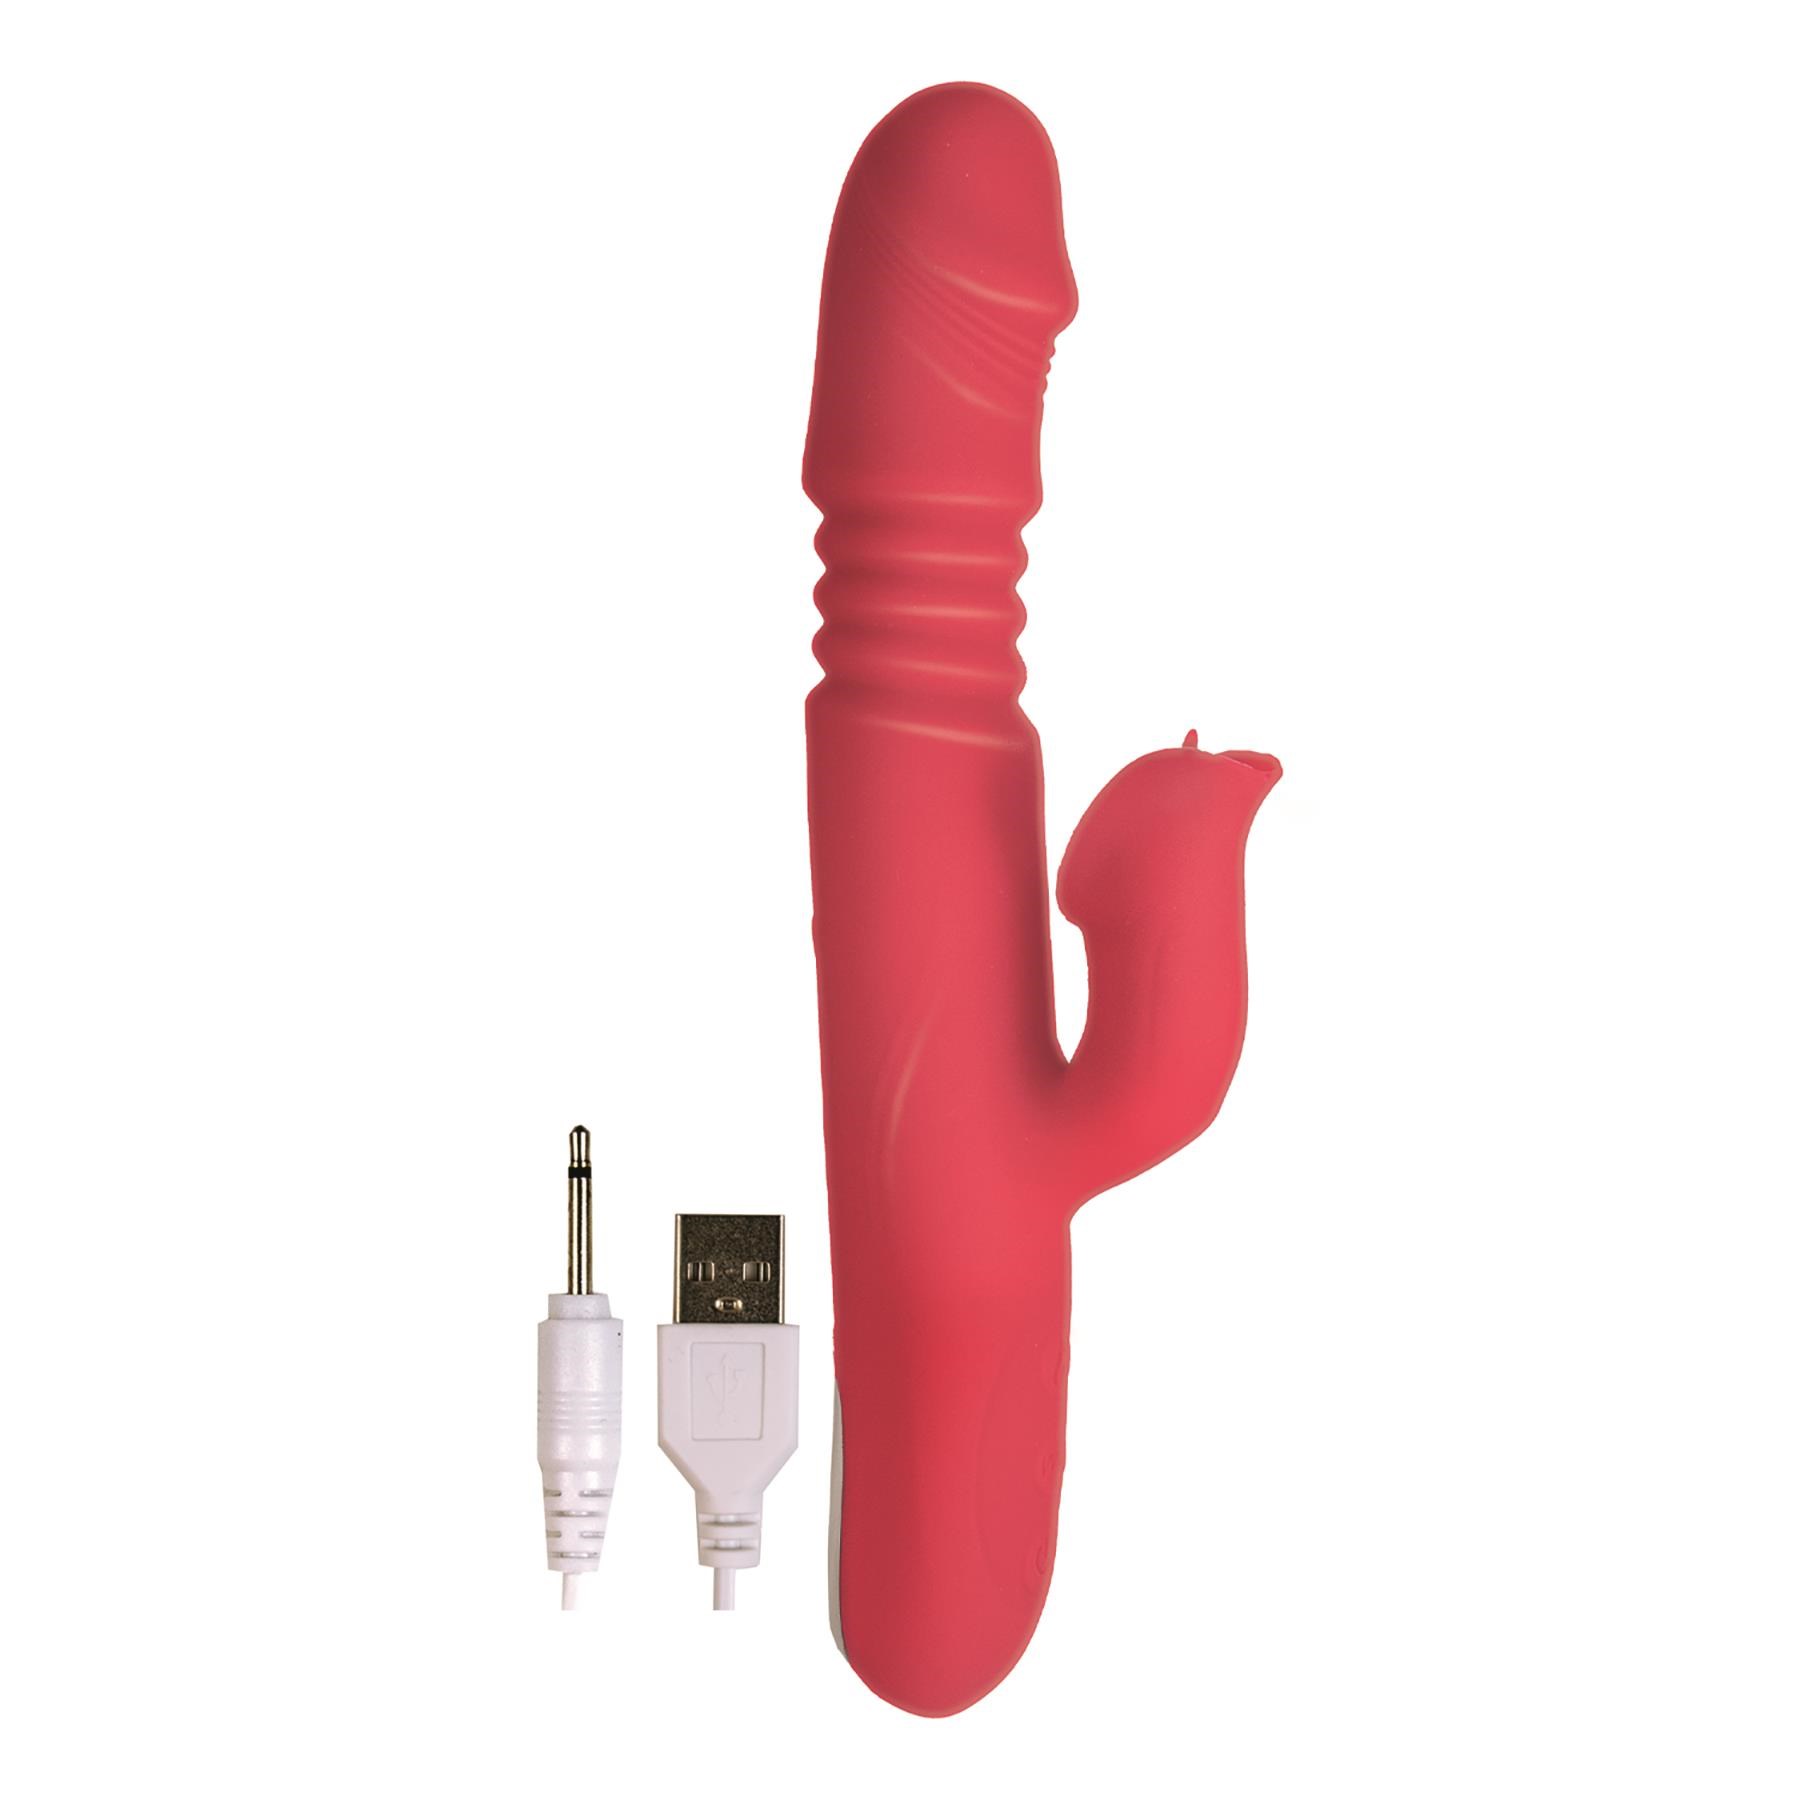 Princess Passion Heat Thrusting Dual Stimulator - Product and Charging Cable